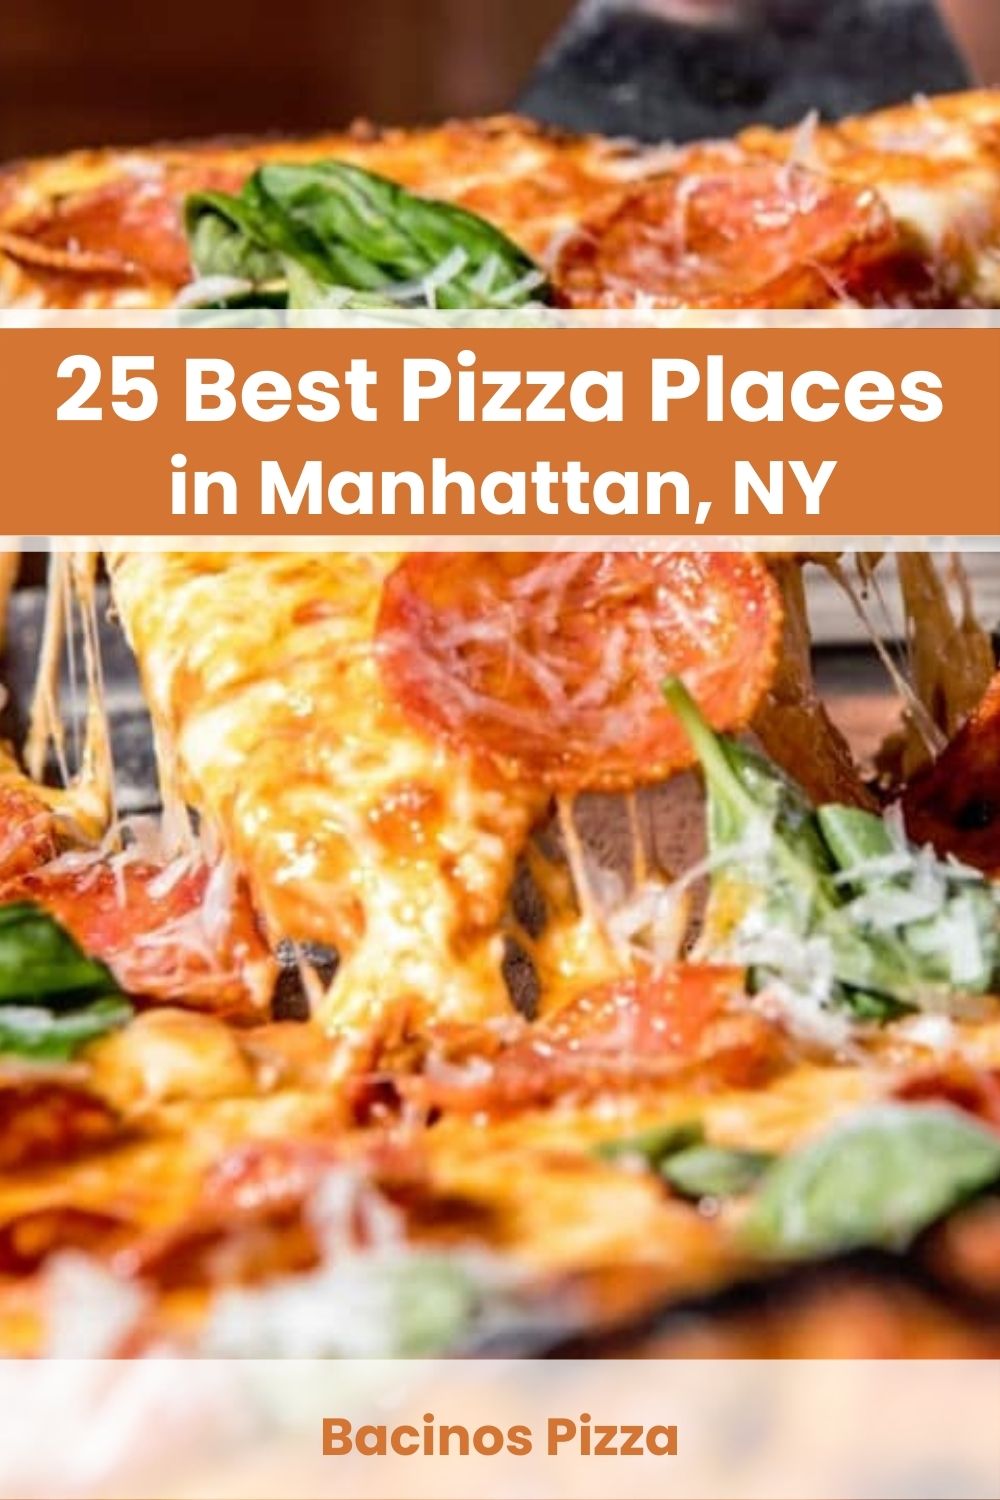 Best Pizza Places in Manhattan ny